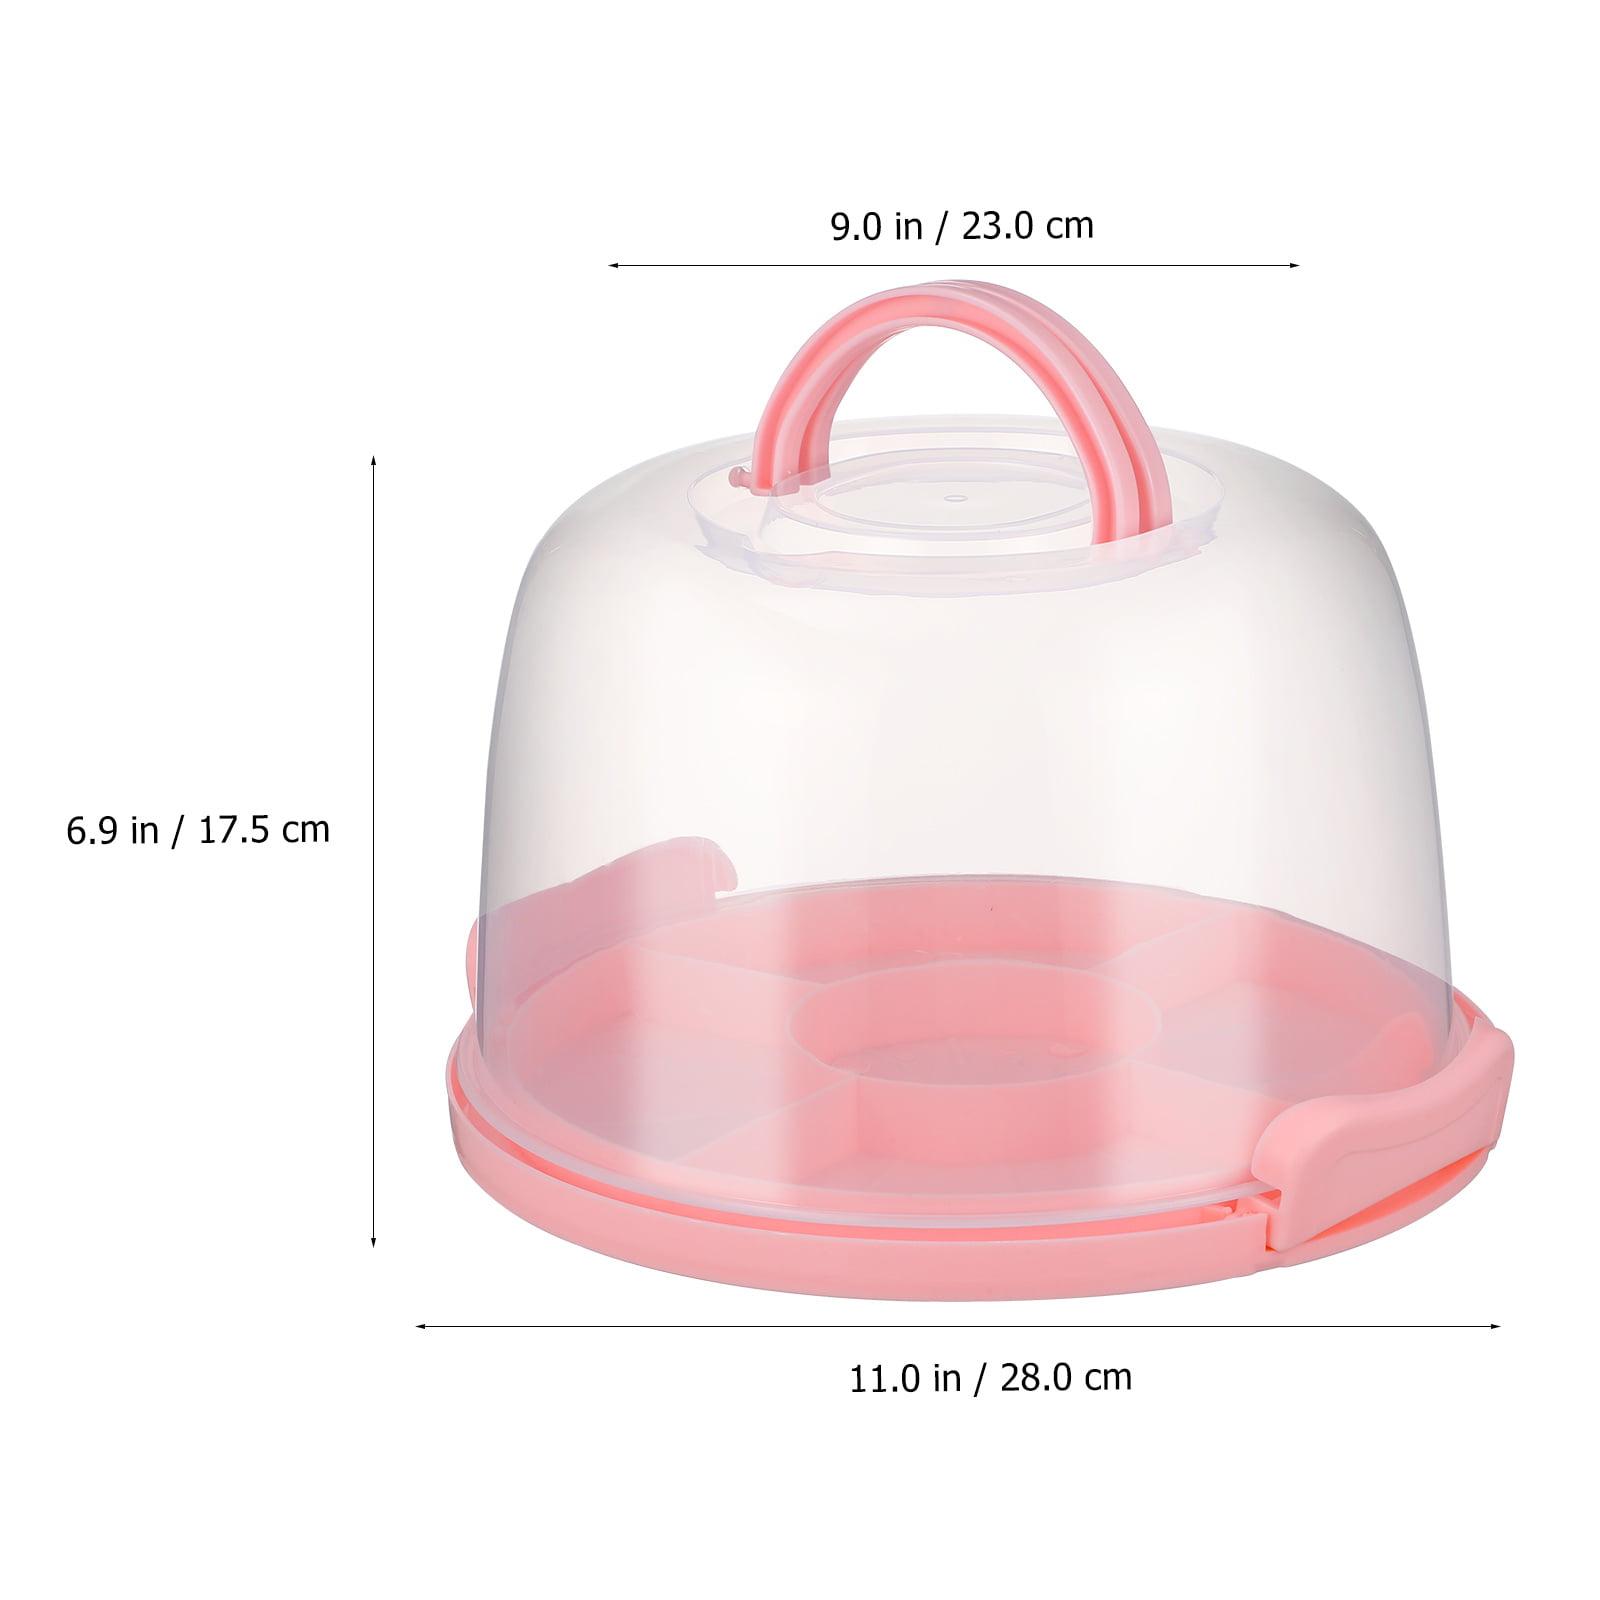  SOUJOY 2in1 Cupcake Carrier, Cupcake Keeper with Lid, Cupcake  Holder to Fit 12 Standard-Size Cupcakes, Portable Dessert Container  Transports Display Box for Cakes, Pies, Muffin : Home & Kitchen